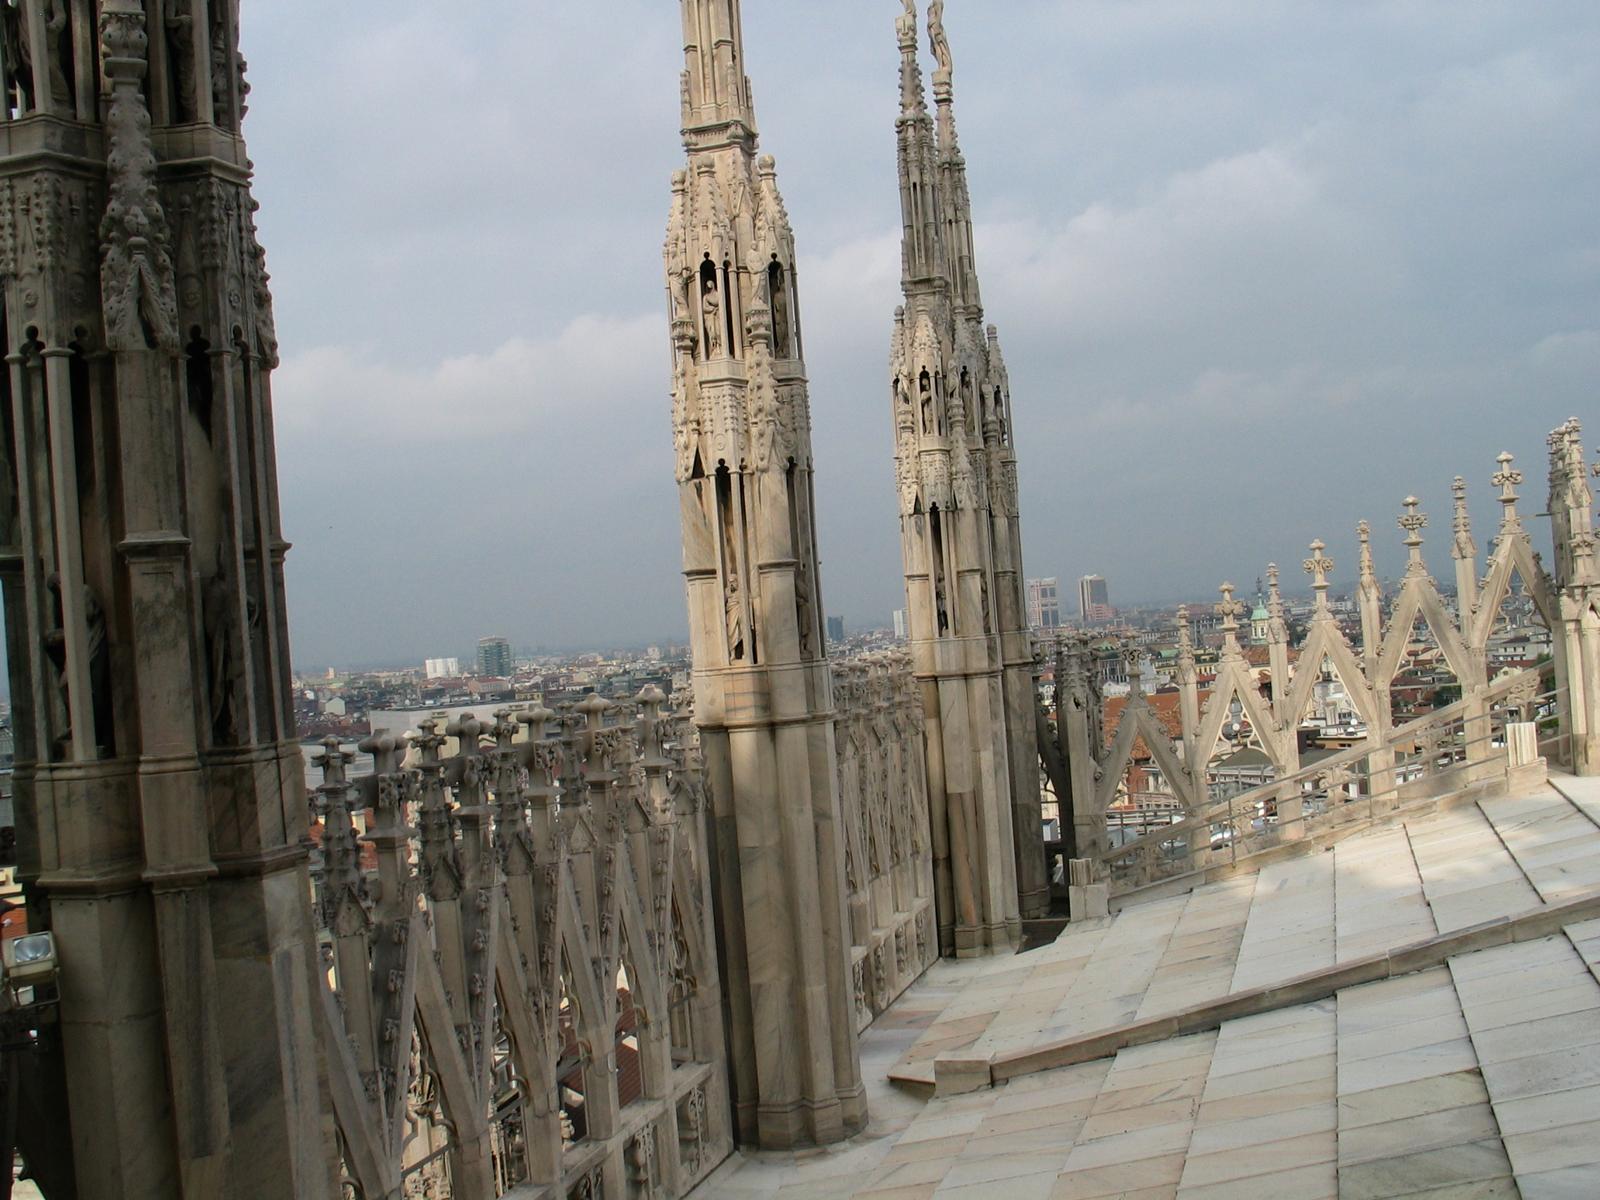 Top of the Duomo